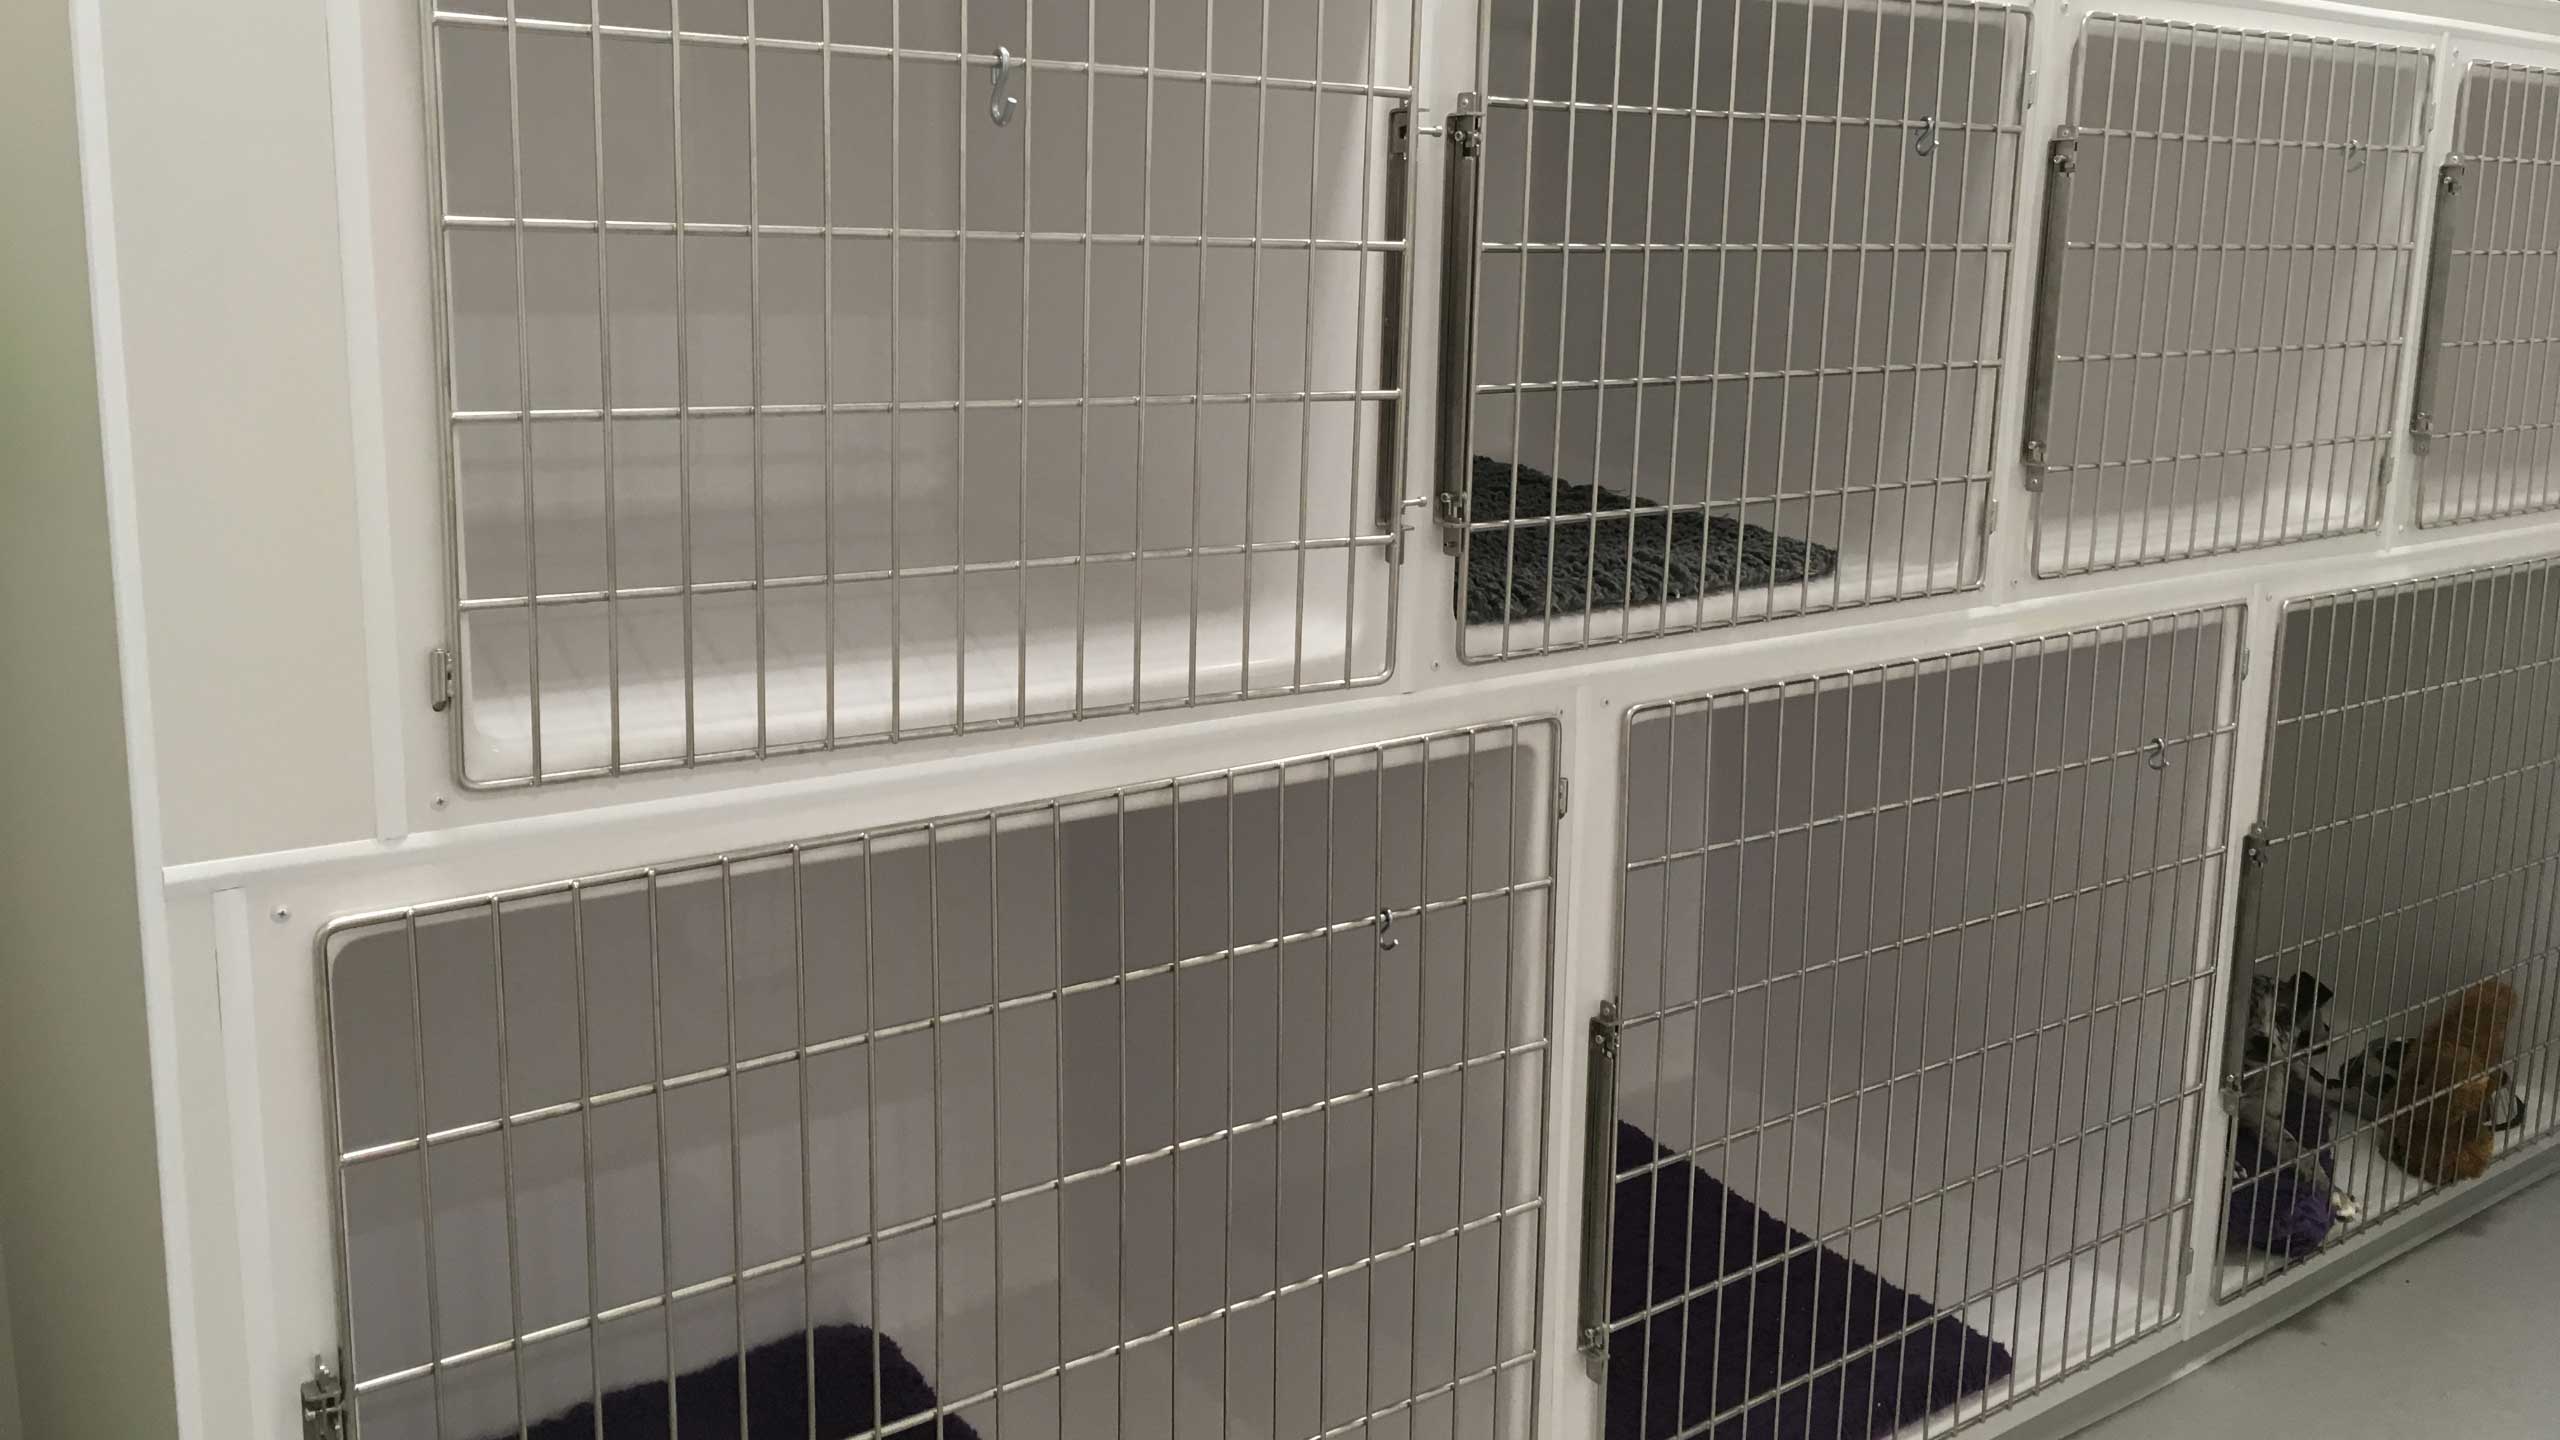 Creature Comfort Cages cage bank: 4 x Medium Dog Cages (top), 3 x Large Dog Cages (bottom)